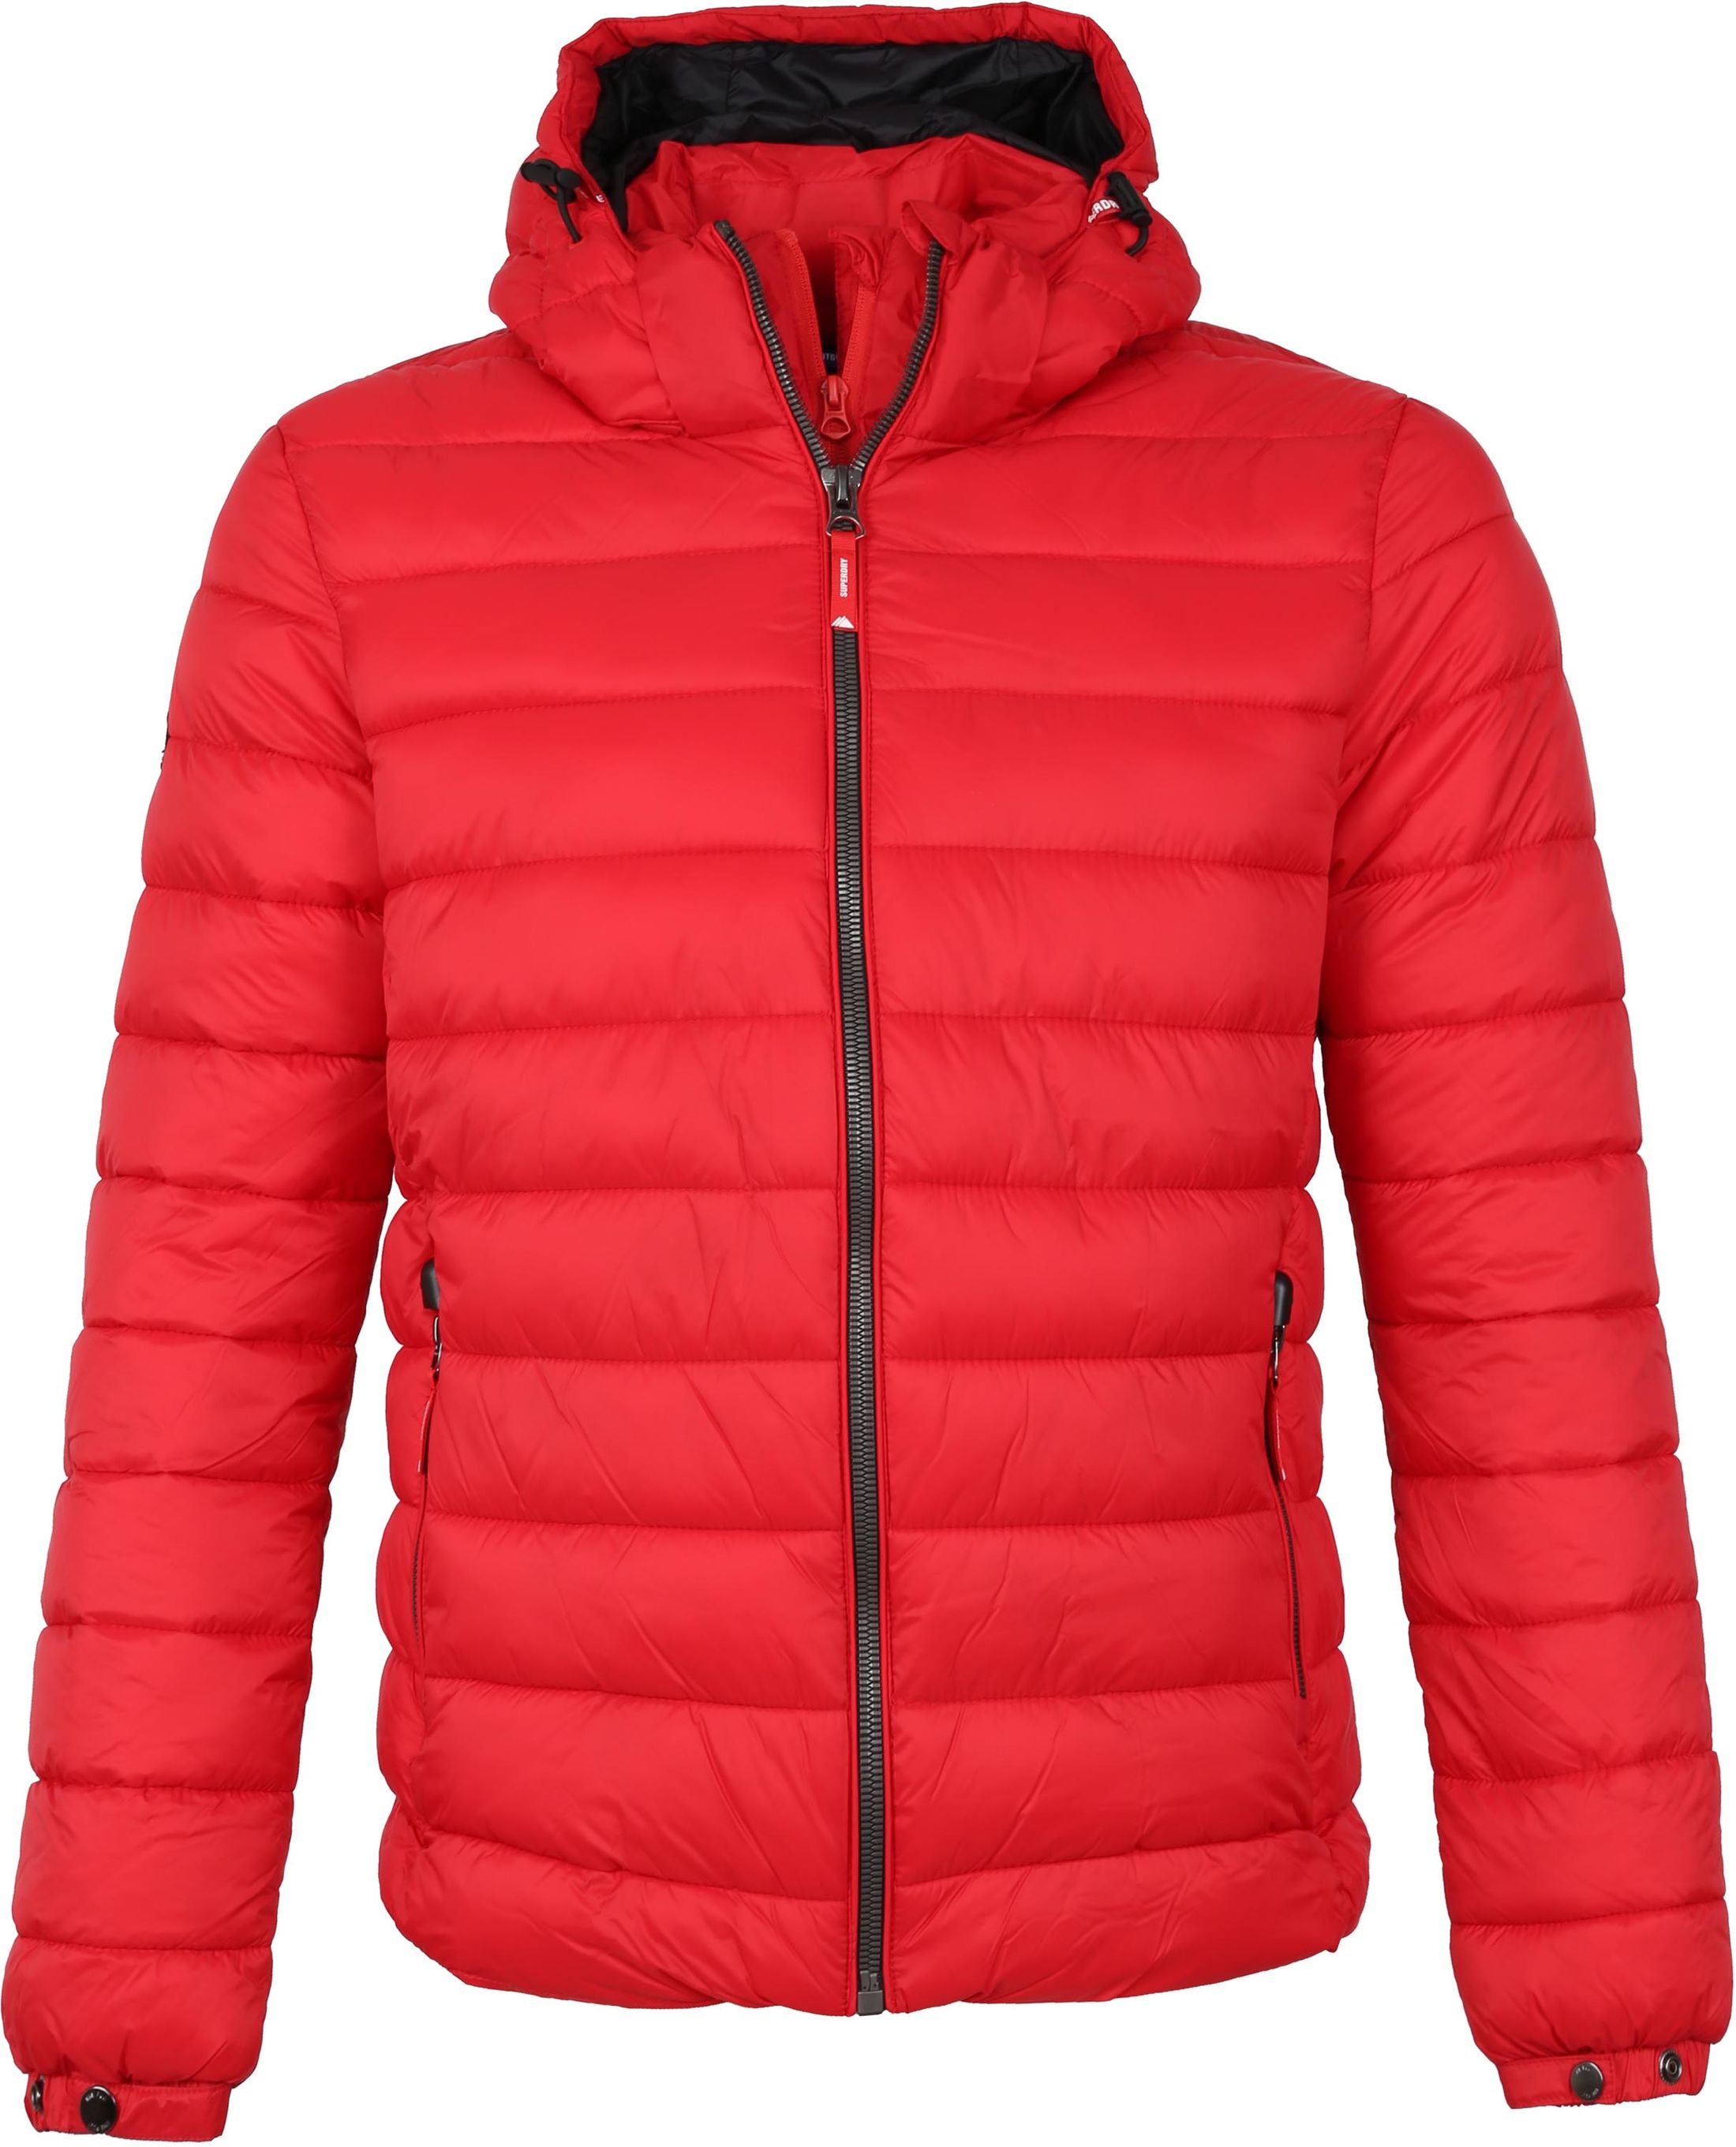 Superdry Fuji Puffer Jacket Red size L